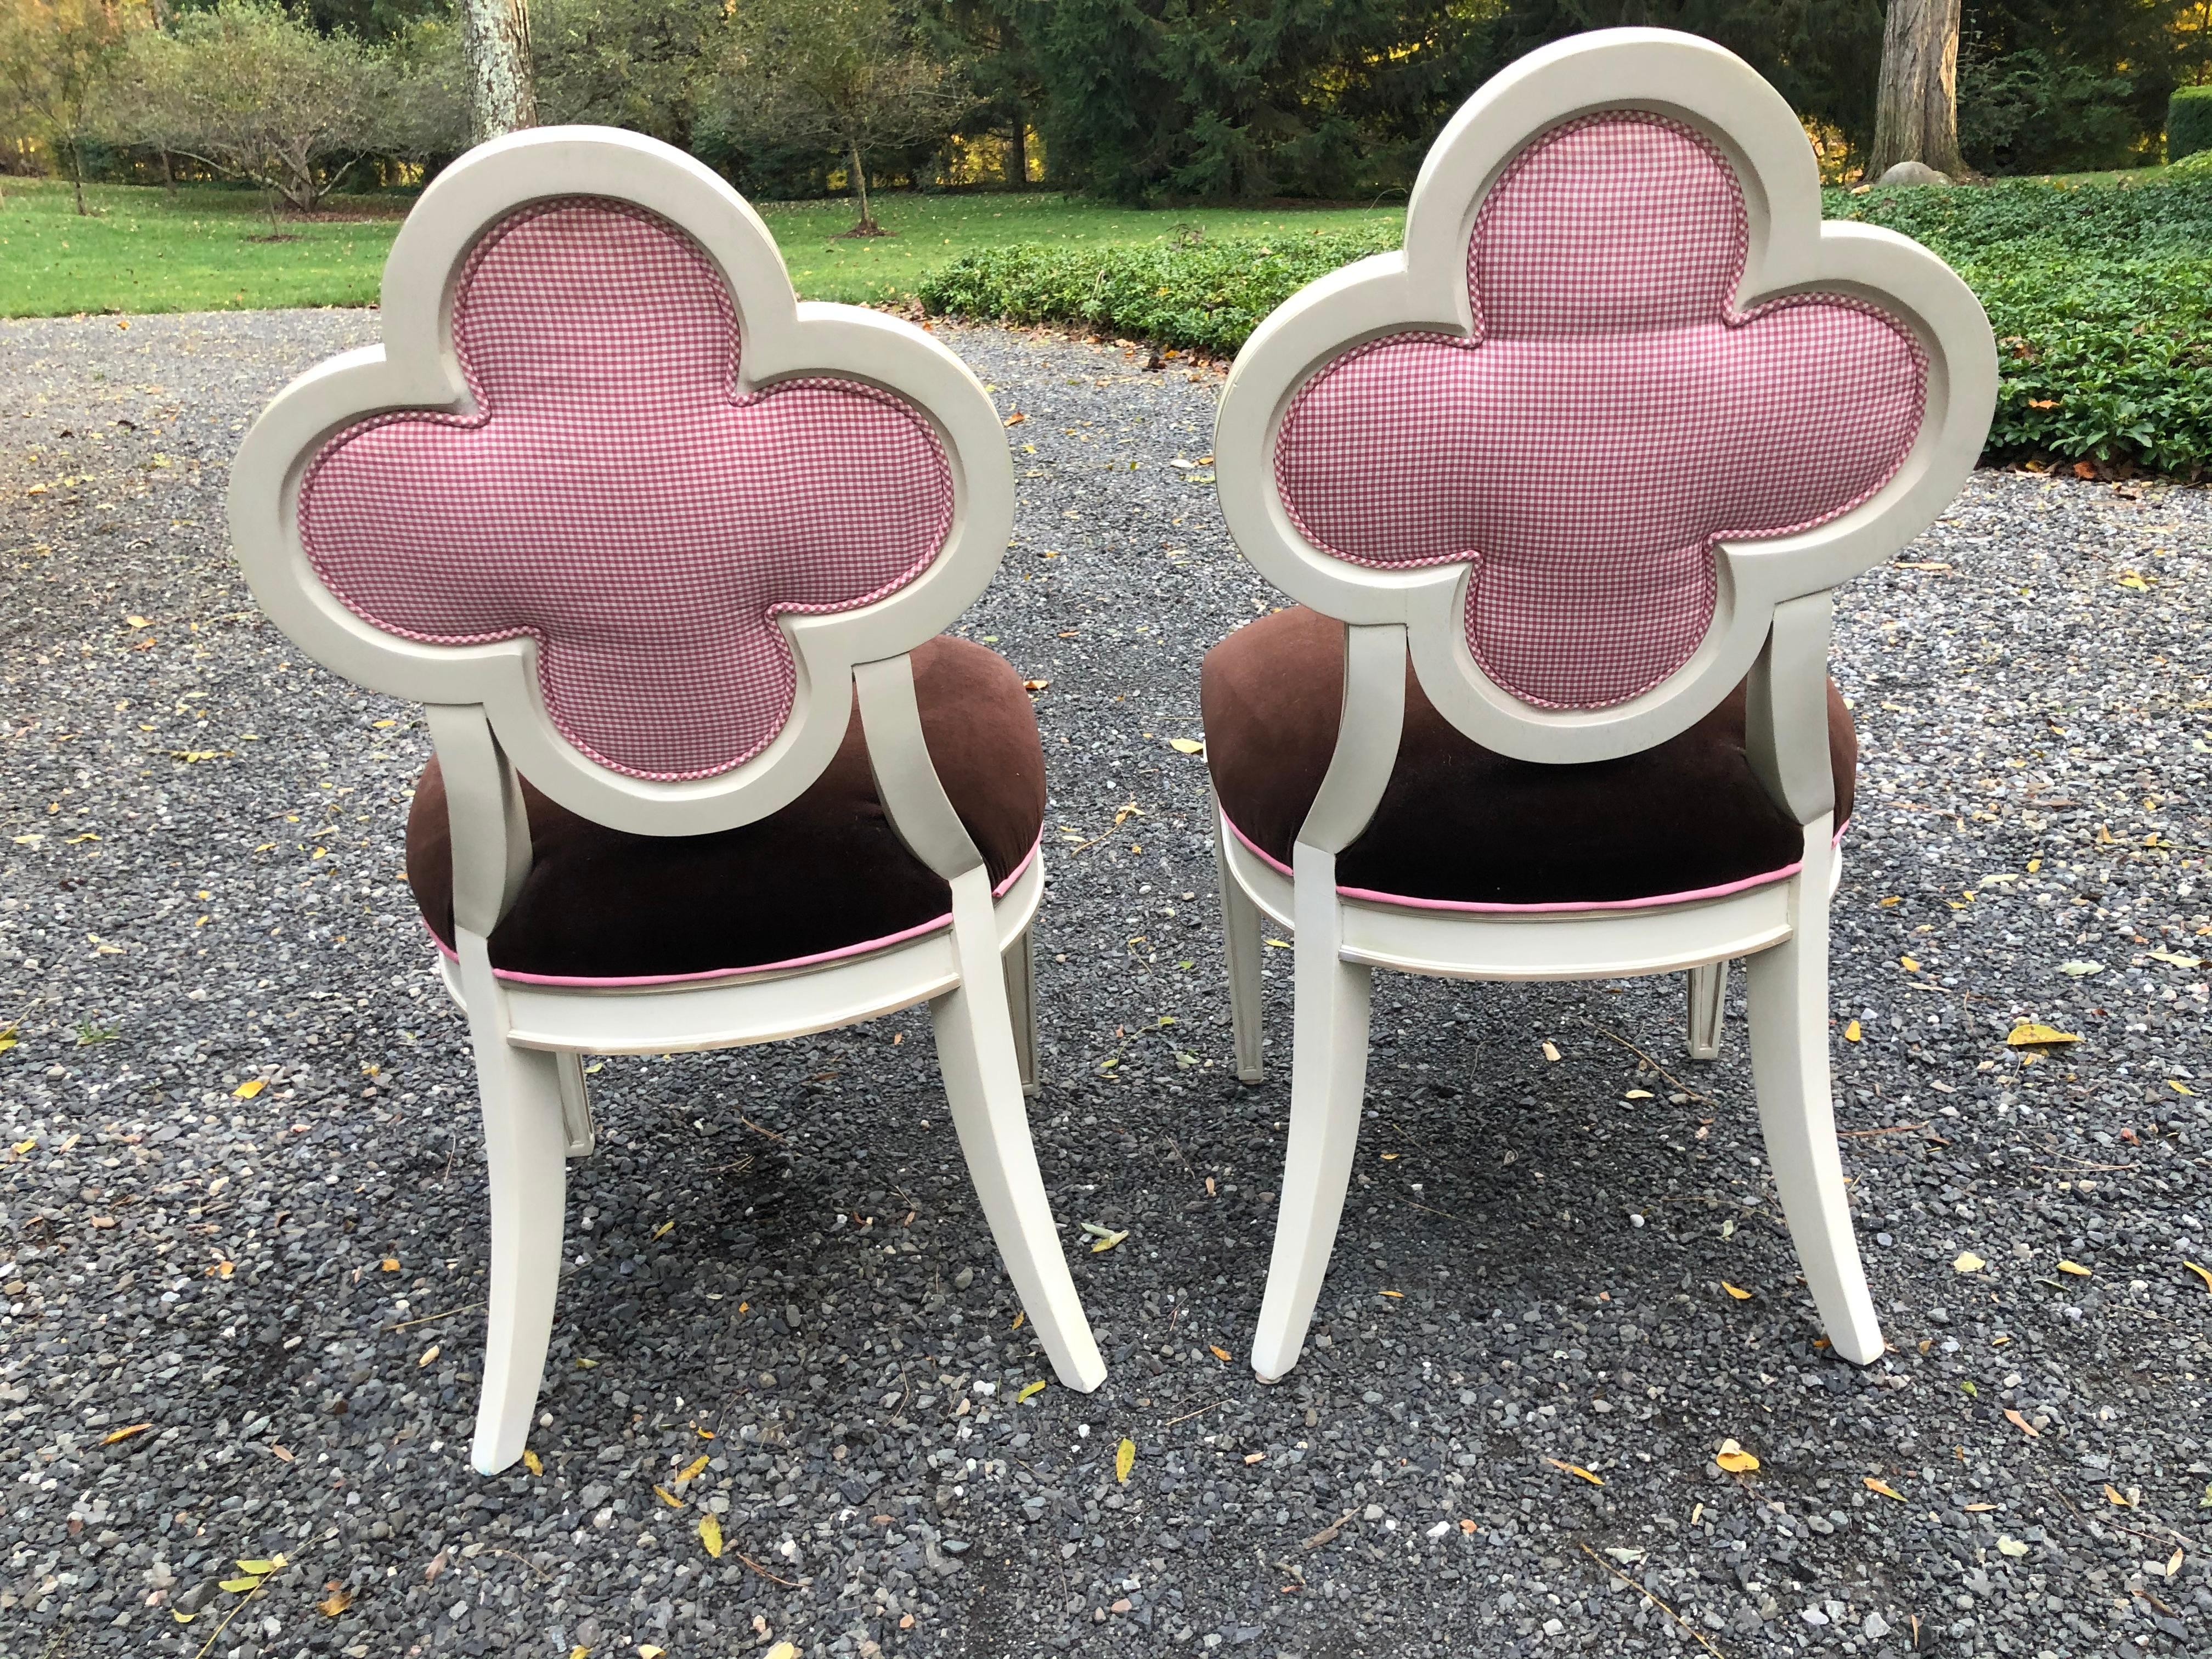 Pair of Alexandra accent chairs by designer Suzanne Kasler for Hickory Chair. The chairs have a quatrefoil back and tapering legs. They are upholstered in brown velvet accented with a pink silk check; the welting throughout is in a pink sateen. The